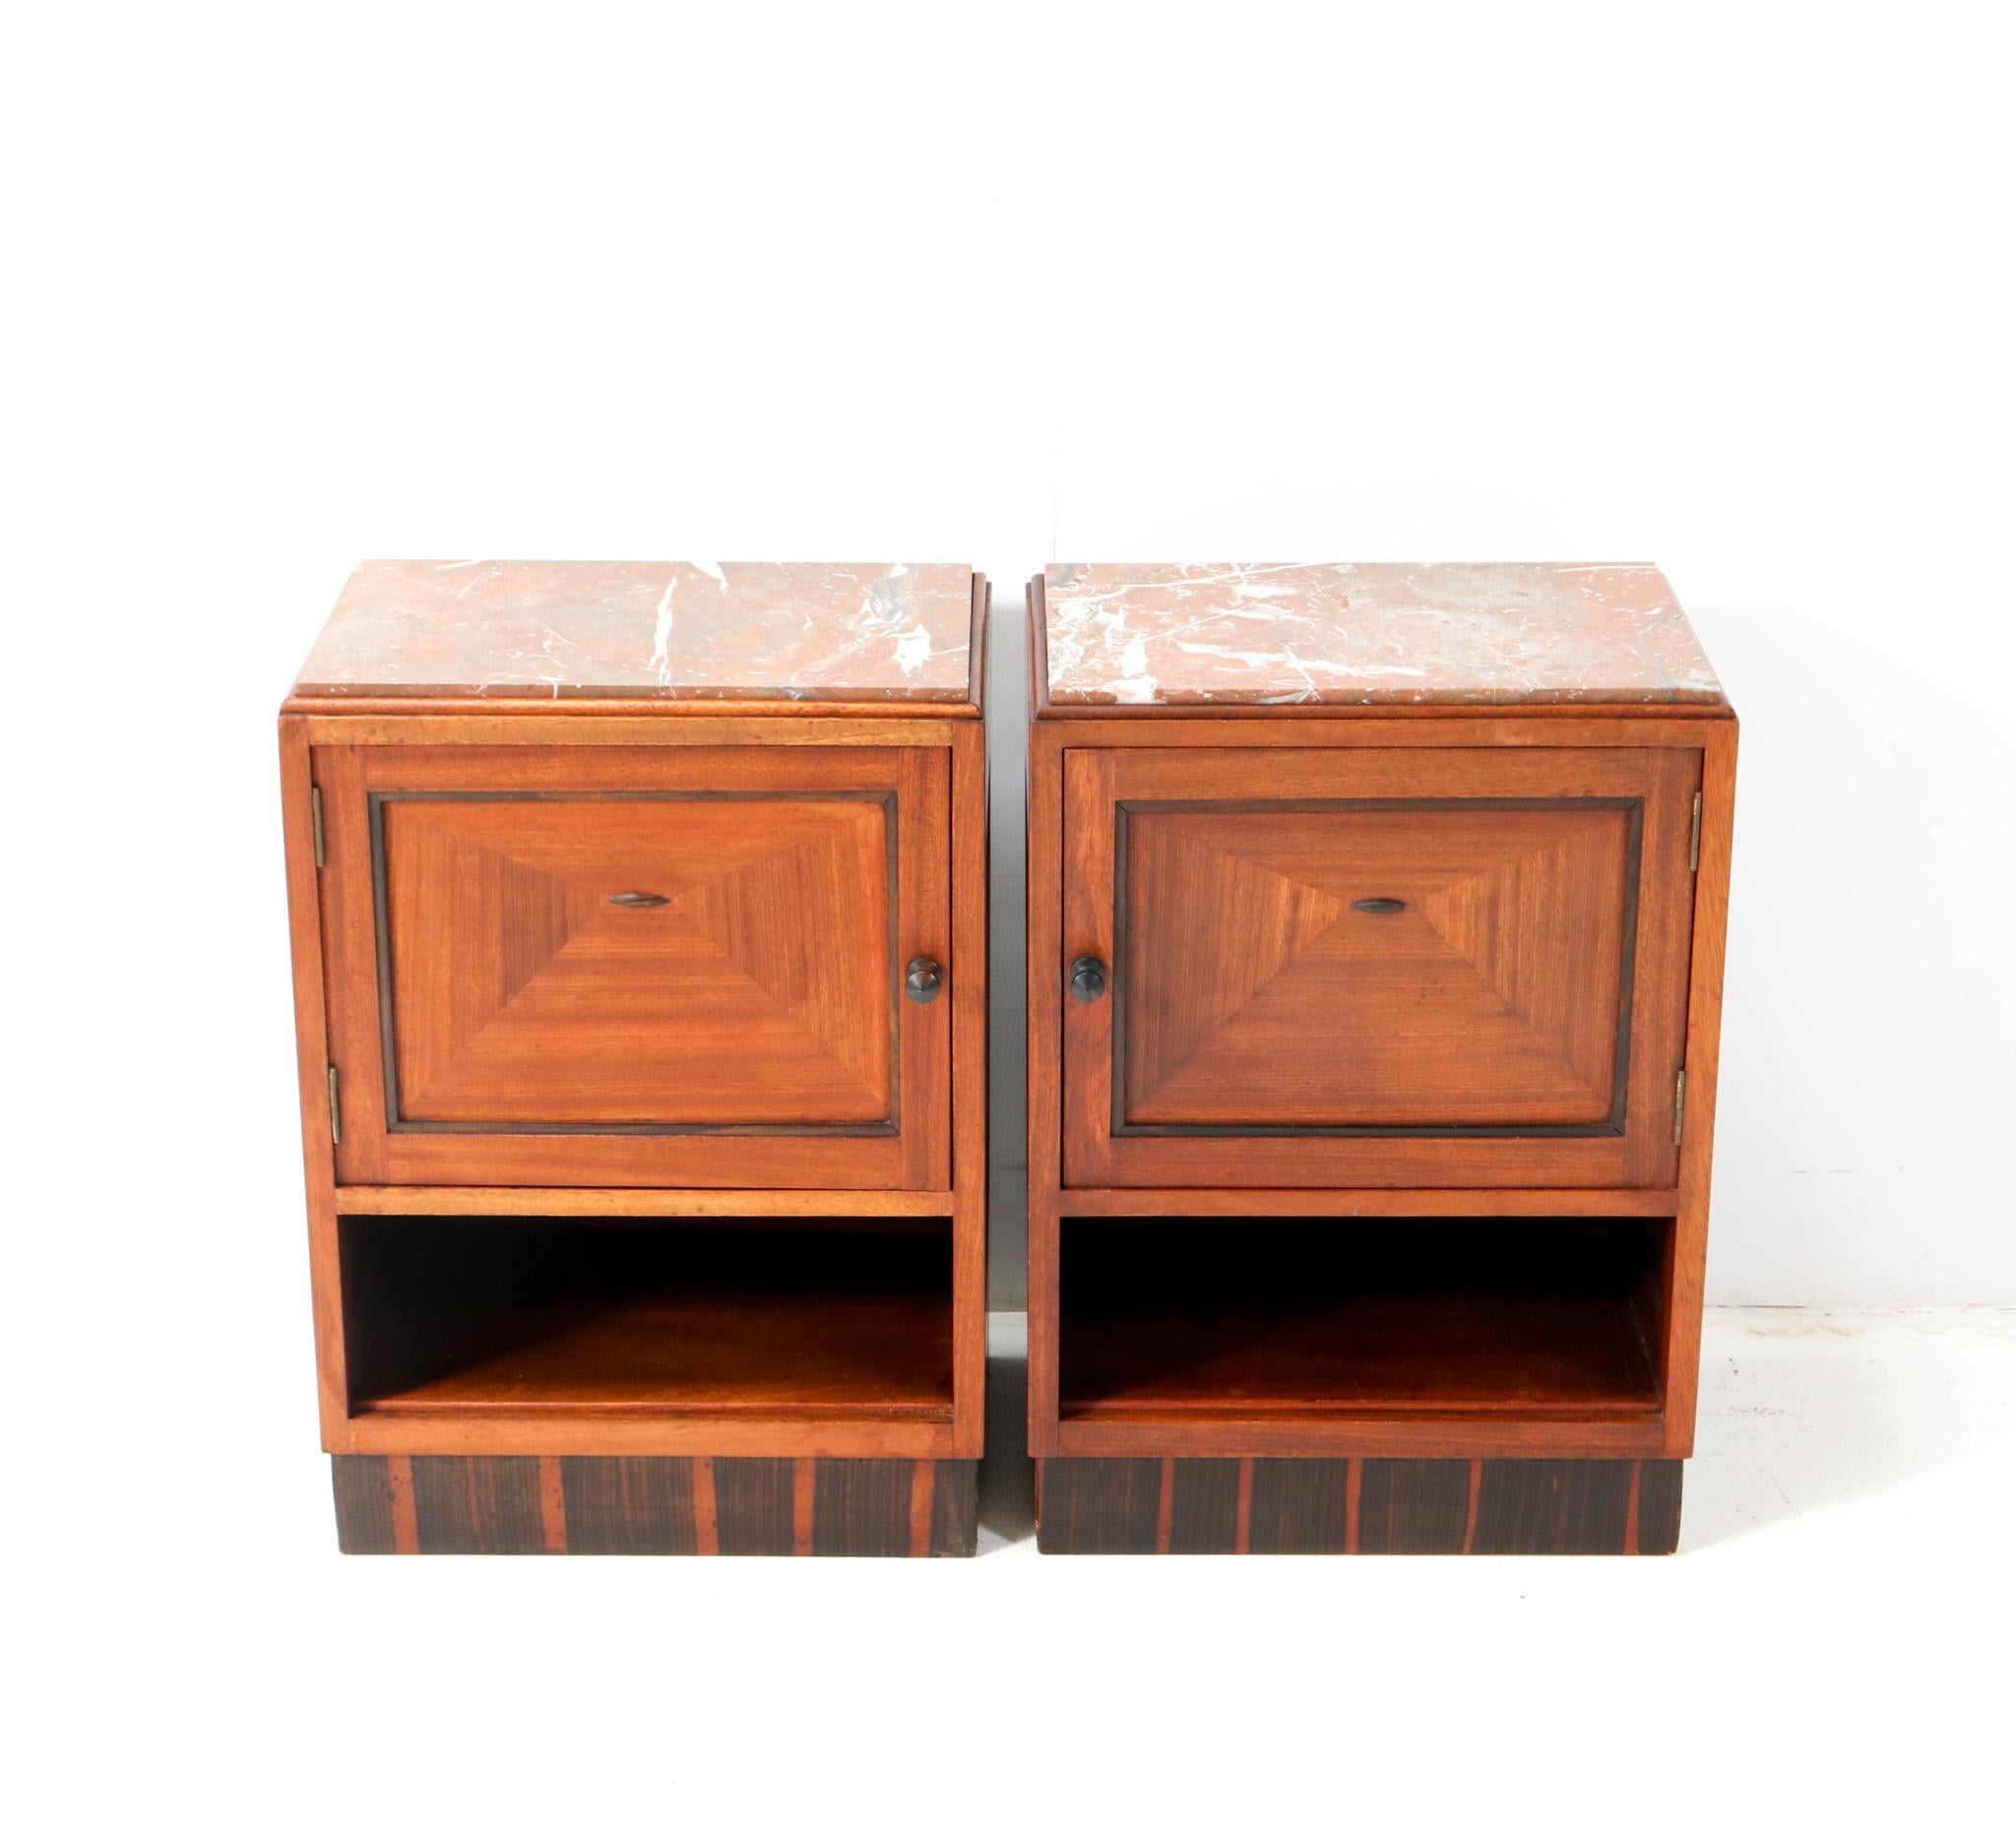 Stunning and rare pair of Art Deco Amsterdamse School nightstands or bedside tables.
Striking Dutch design from the 1920s.
Solid walnut and original walnut veneer base with solid macassar ebony knobs and decorative lining.
Original multi-colored